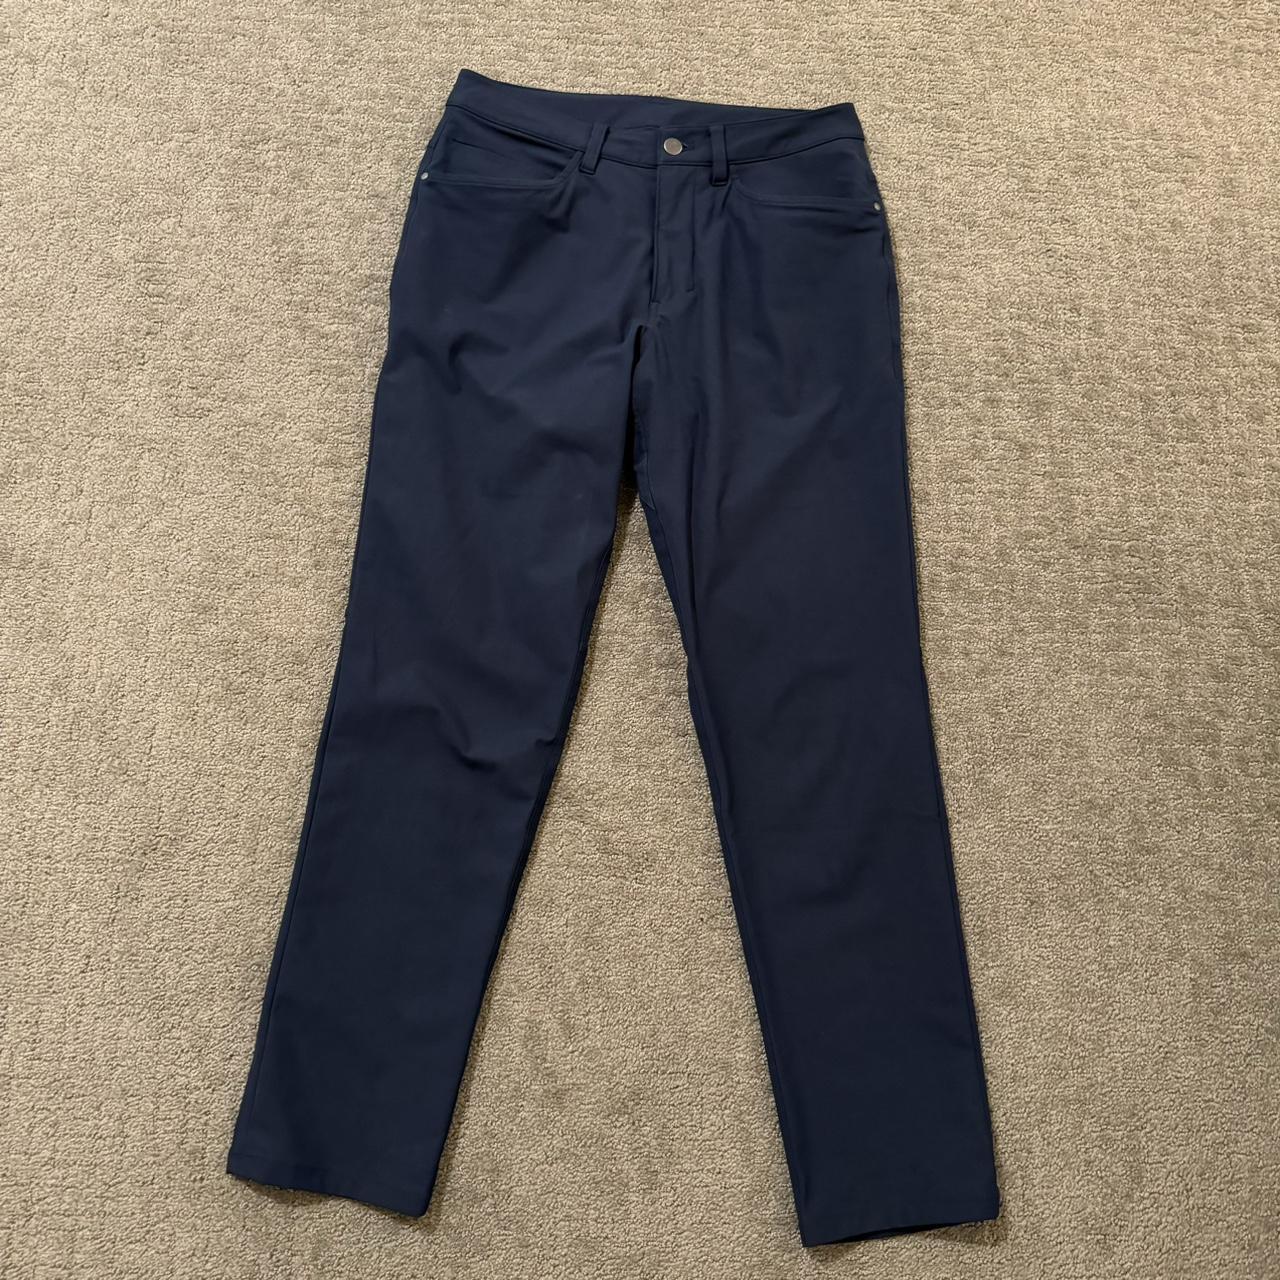 Lululemon On The Fly Pant Take a stroll down the - Depop